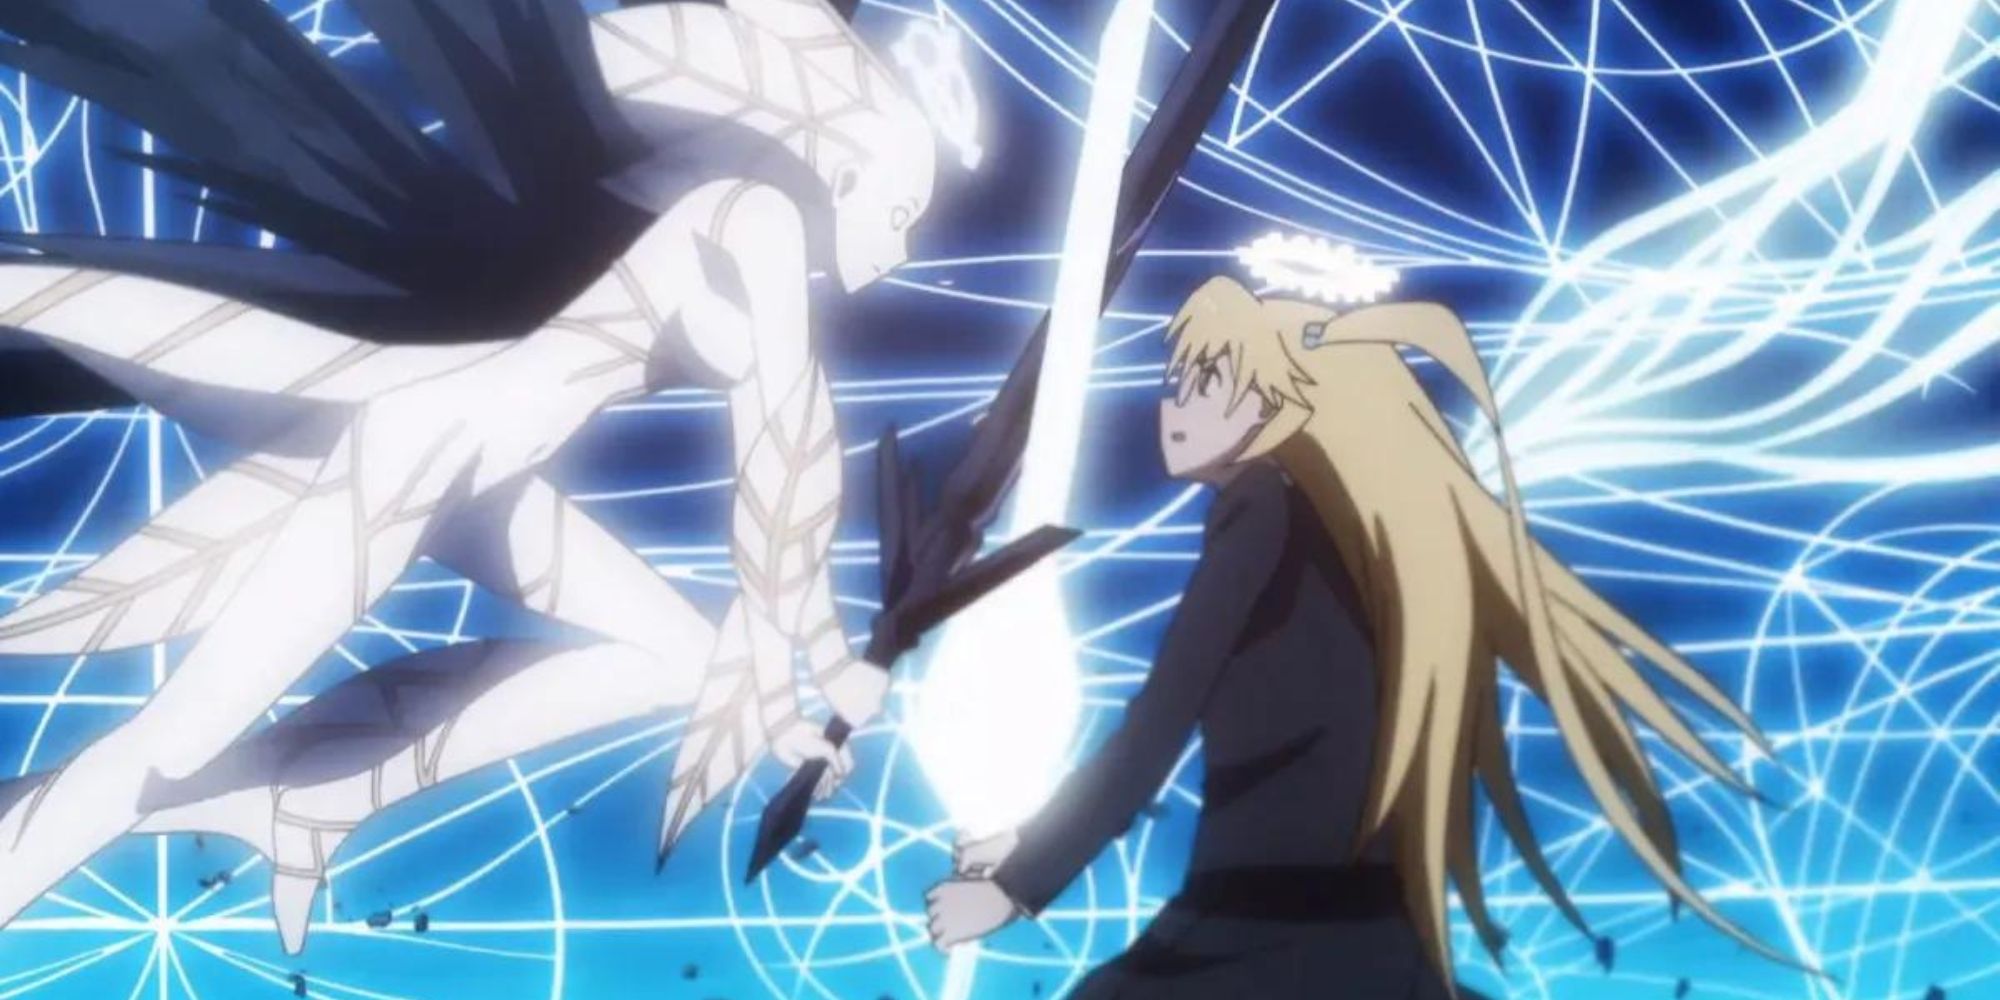 battle in A Certain Magical Index